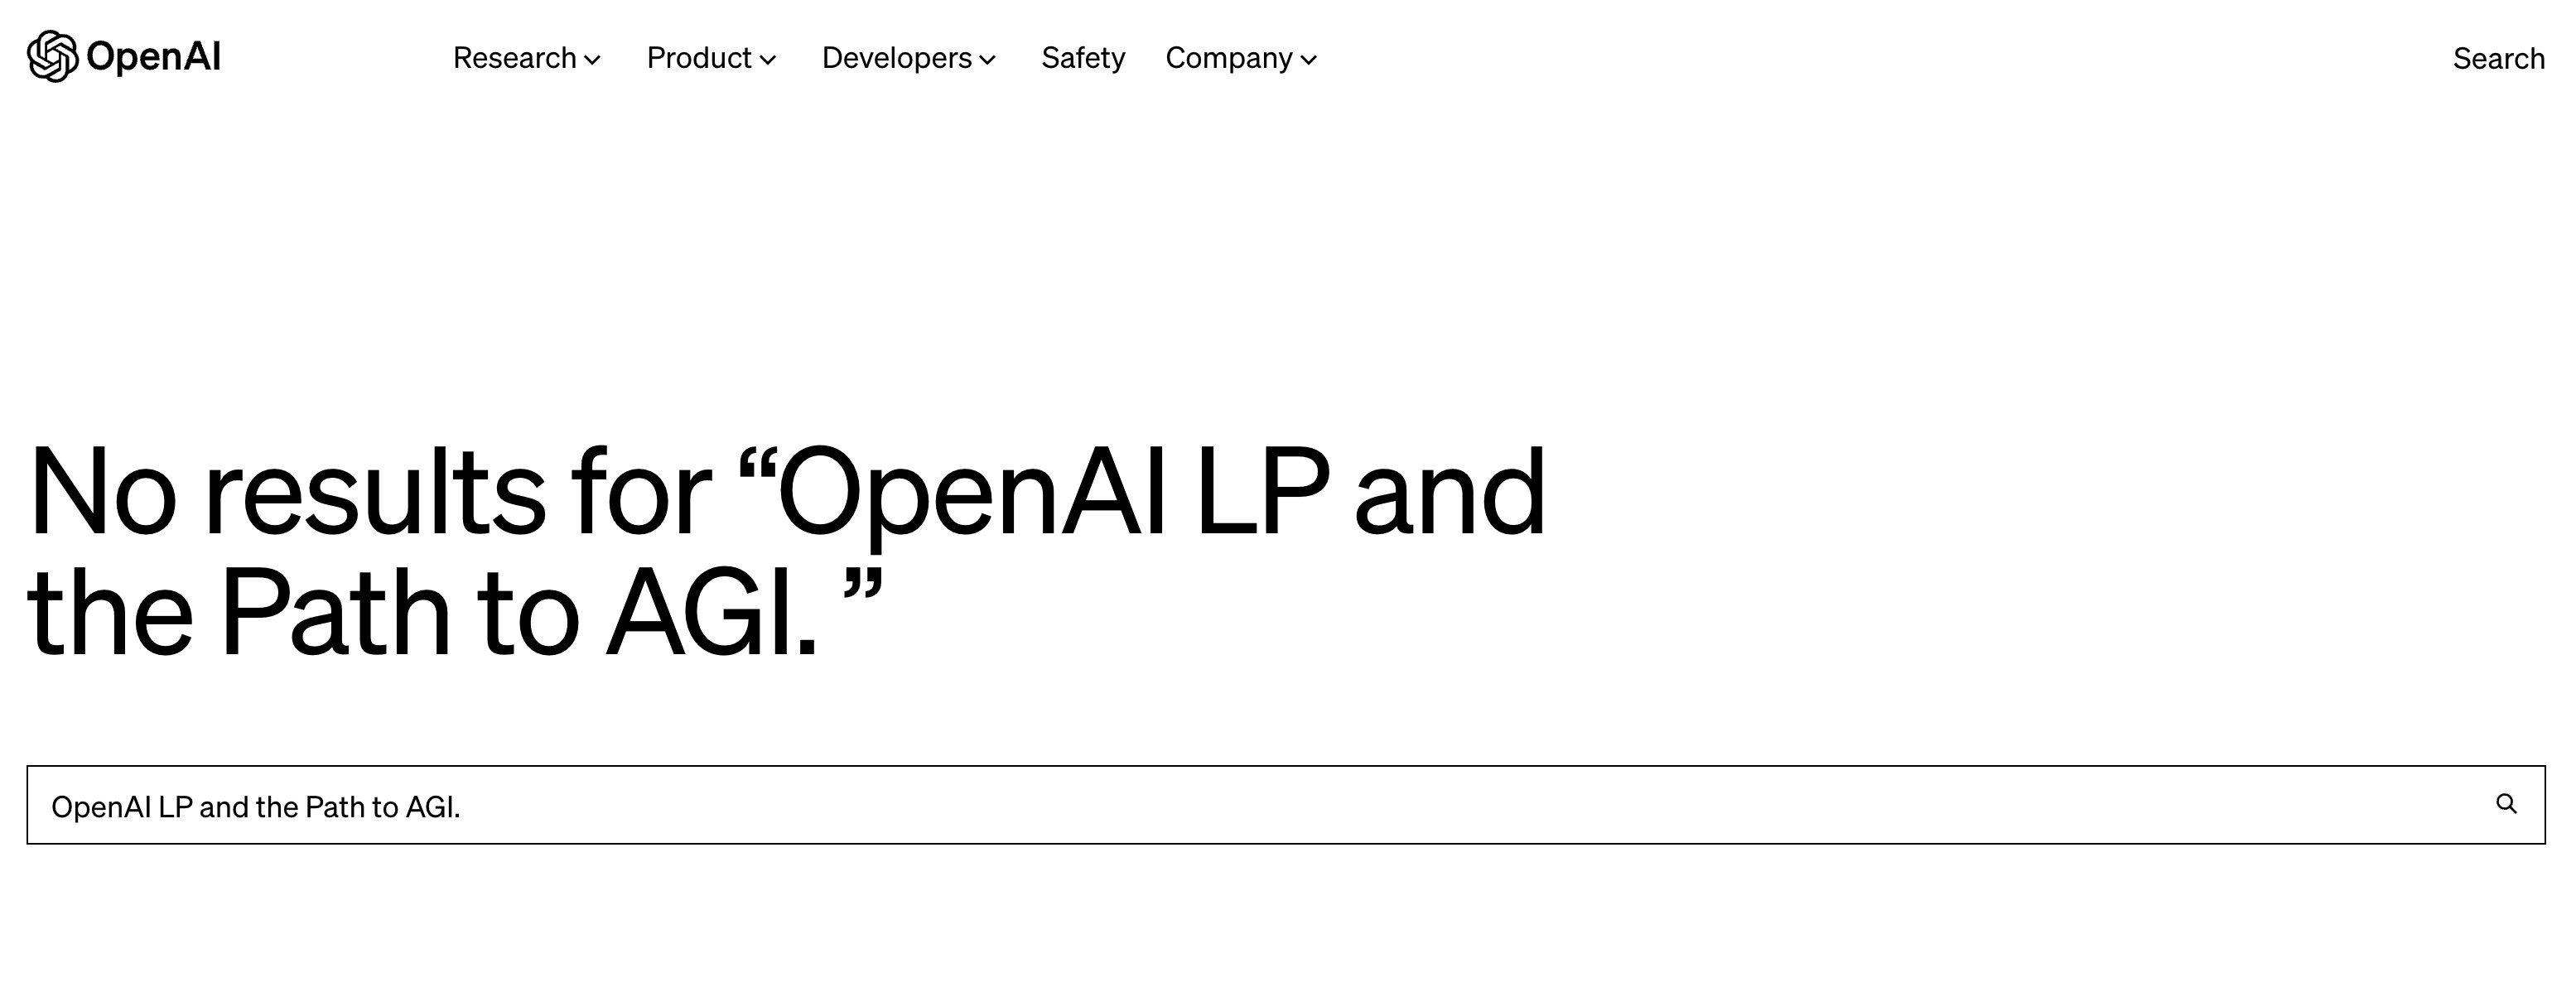 Screenshot of Open AI stating no results for LP and the Path to AGI